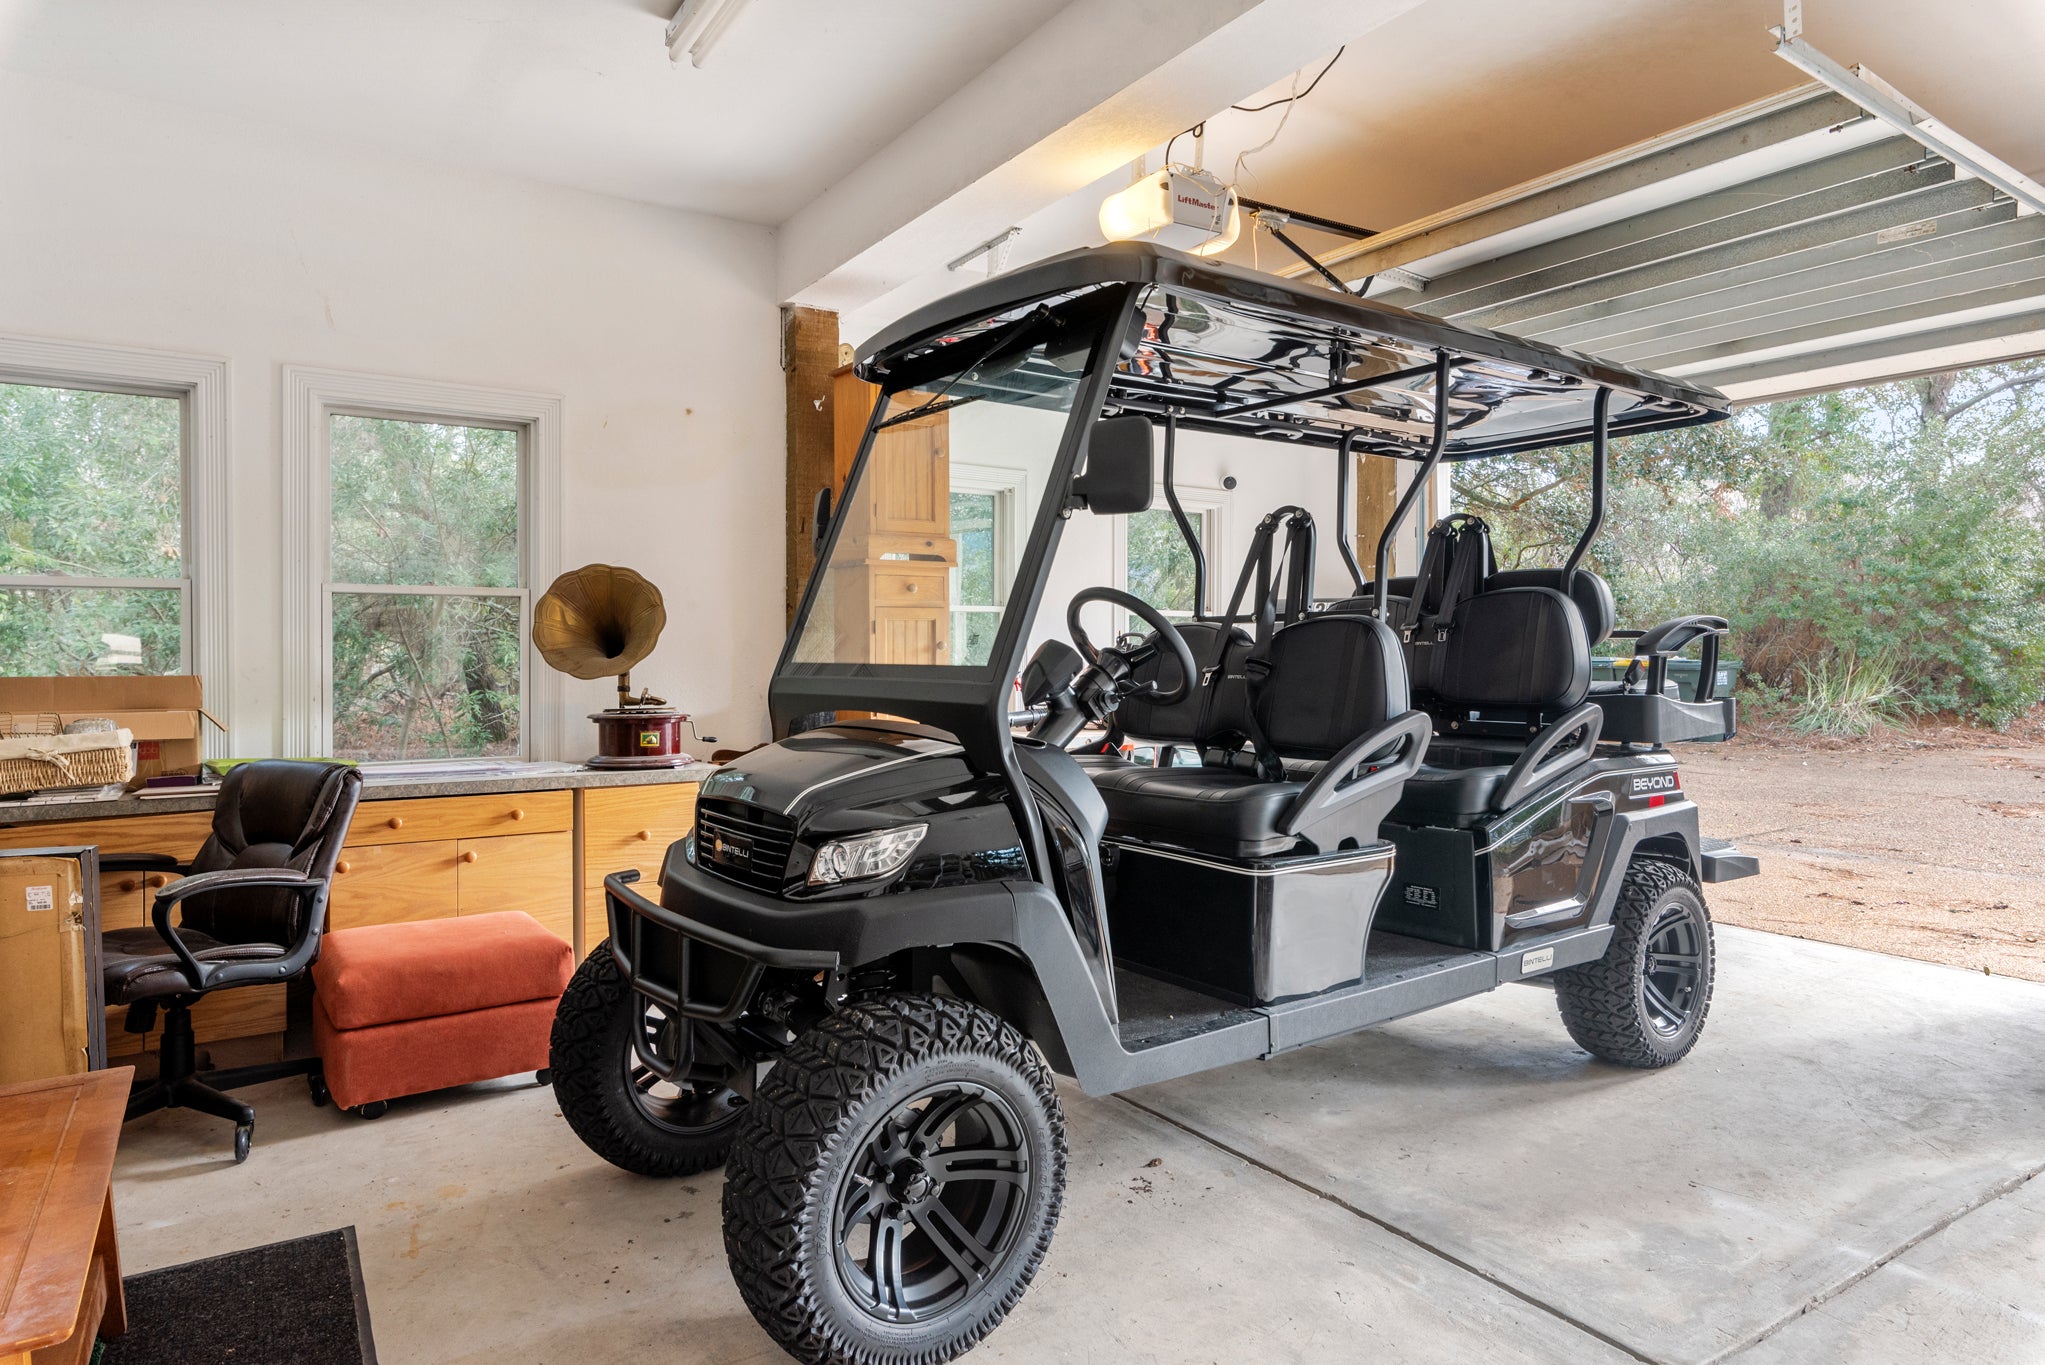 CC177: Picture This | Garage w/ Optional Golf Cart Rental